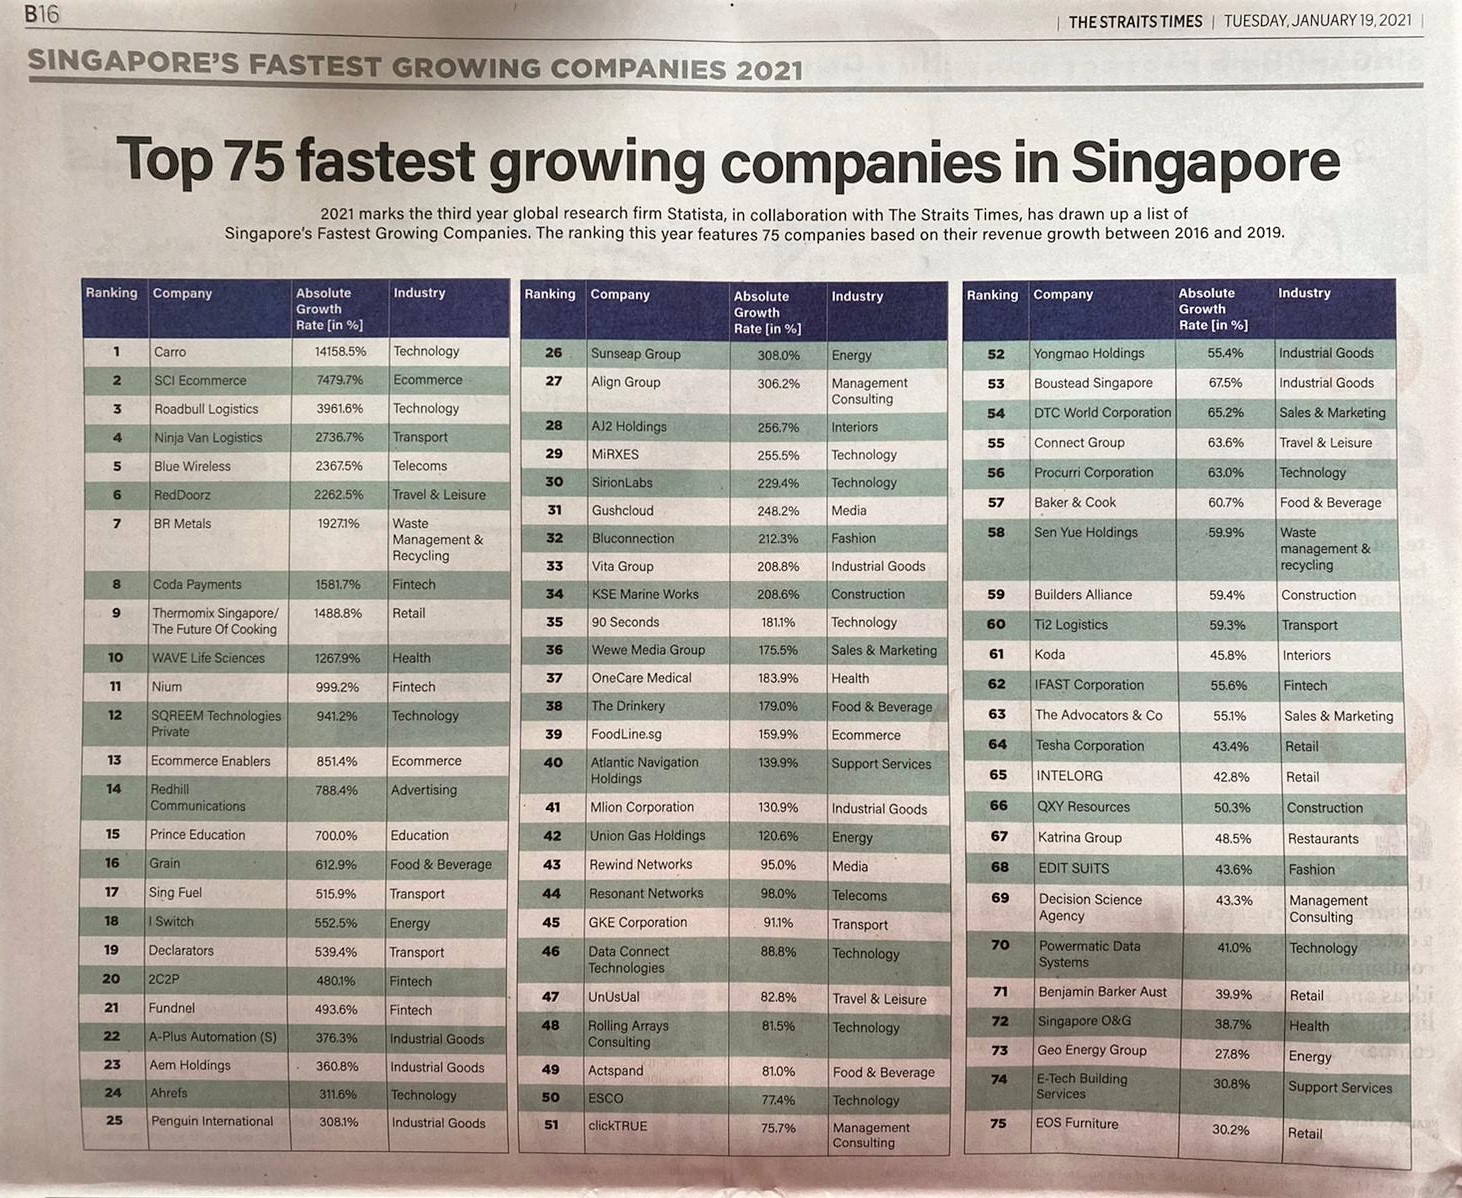 We Made It! SINGAPORE'S FASTEST GROWING COMPANIES 2021